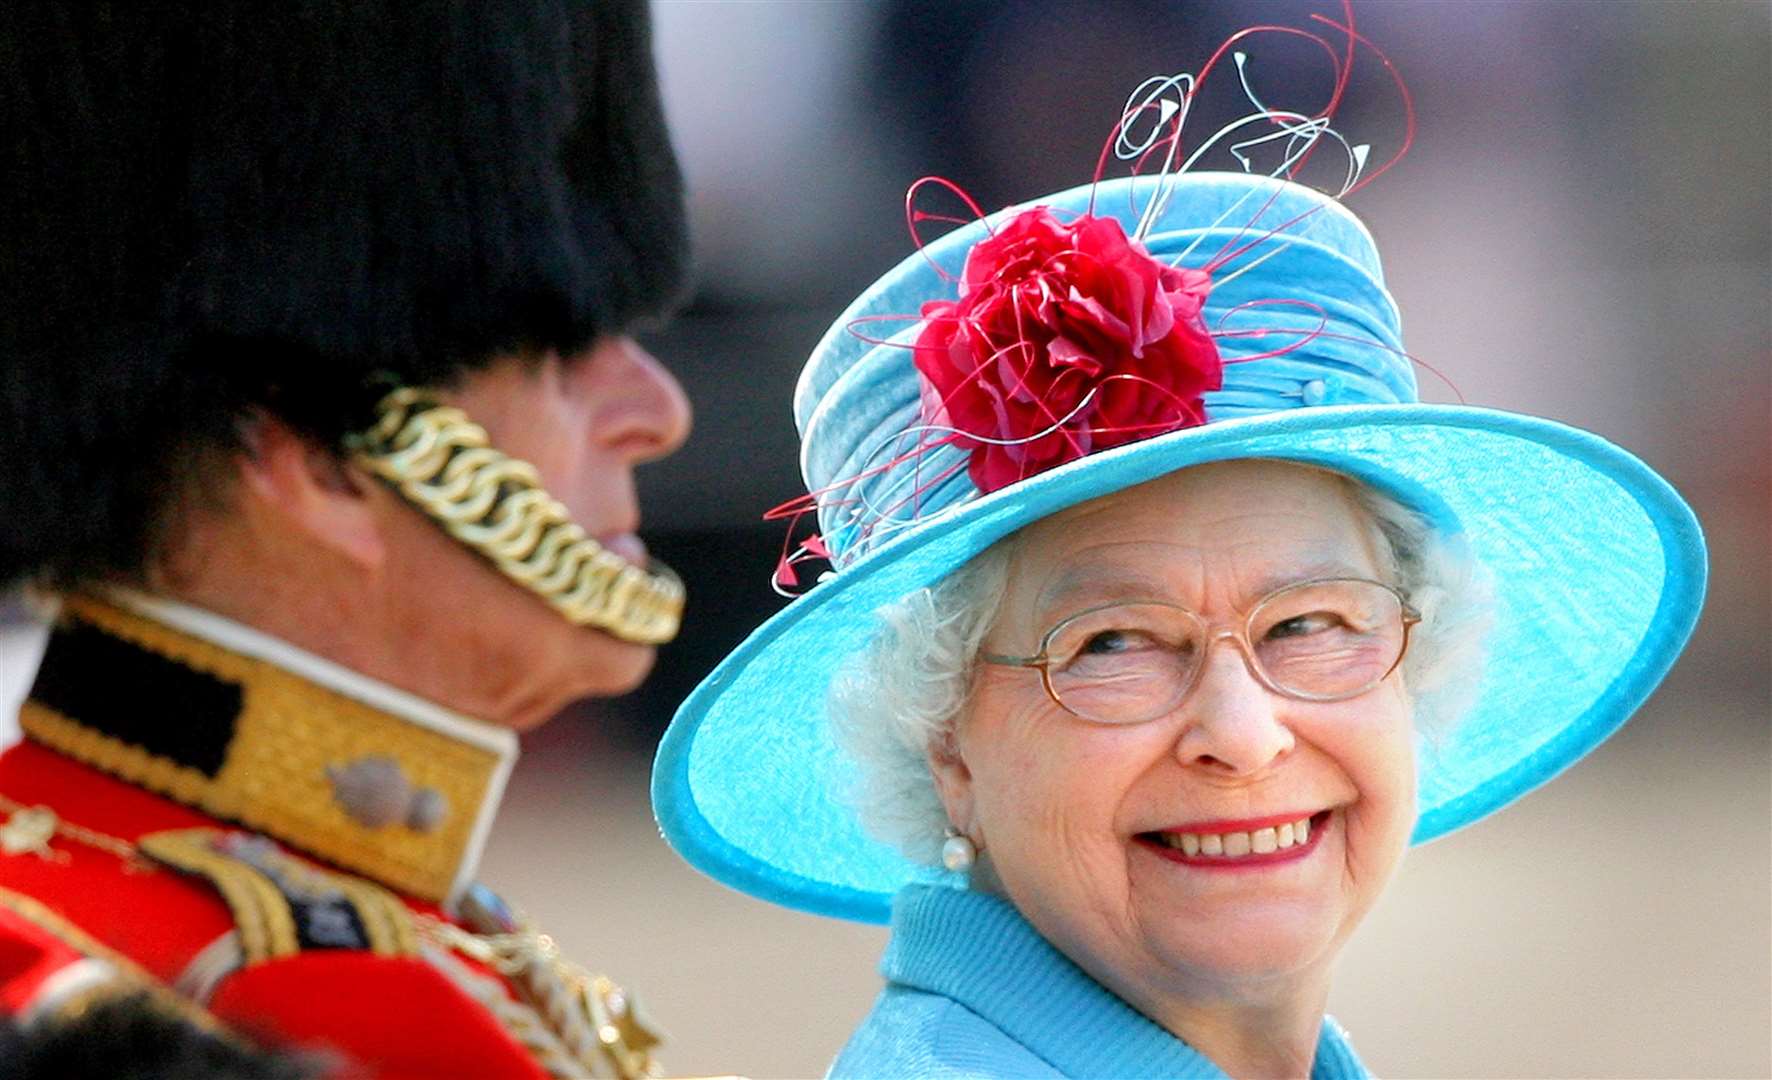 The late Queen smiling at Prince Philip on Horse Guards Parade during the annual Trooping the Colour parade in 2009 (Lewis Whyld/PA)